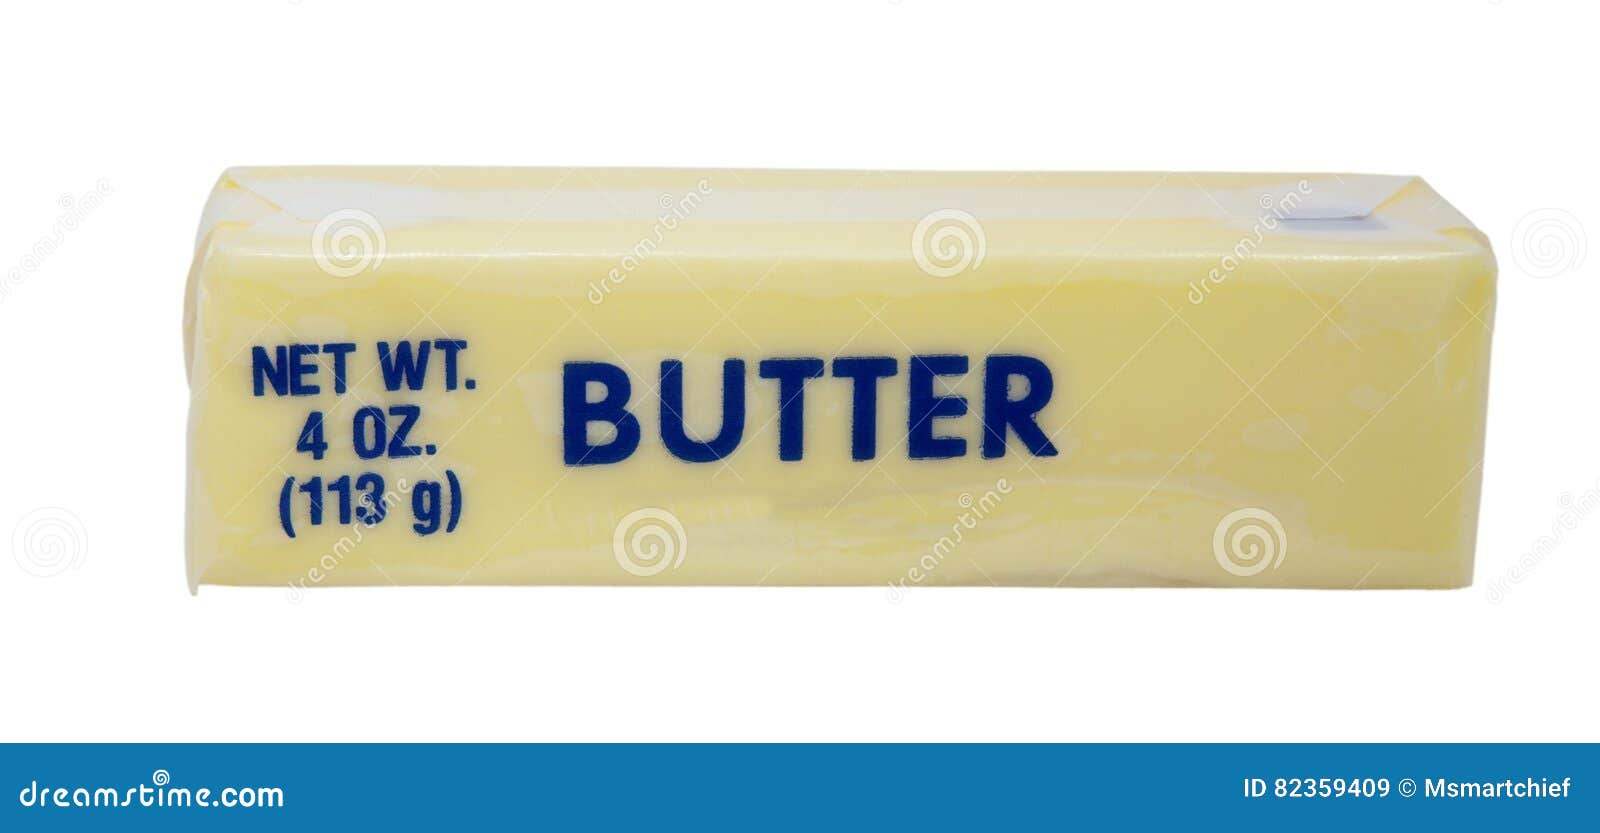 How Many Tablespoons in a Stick of Butter